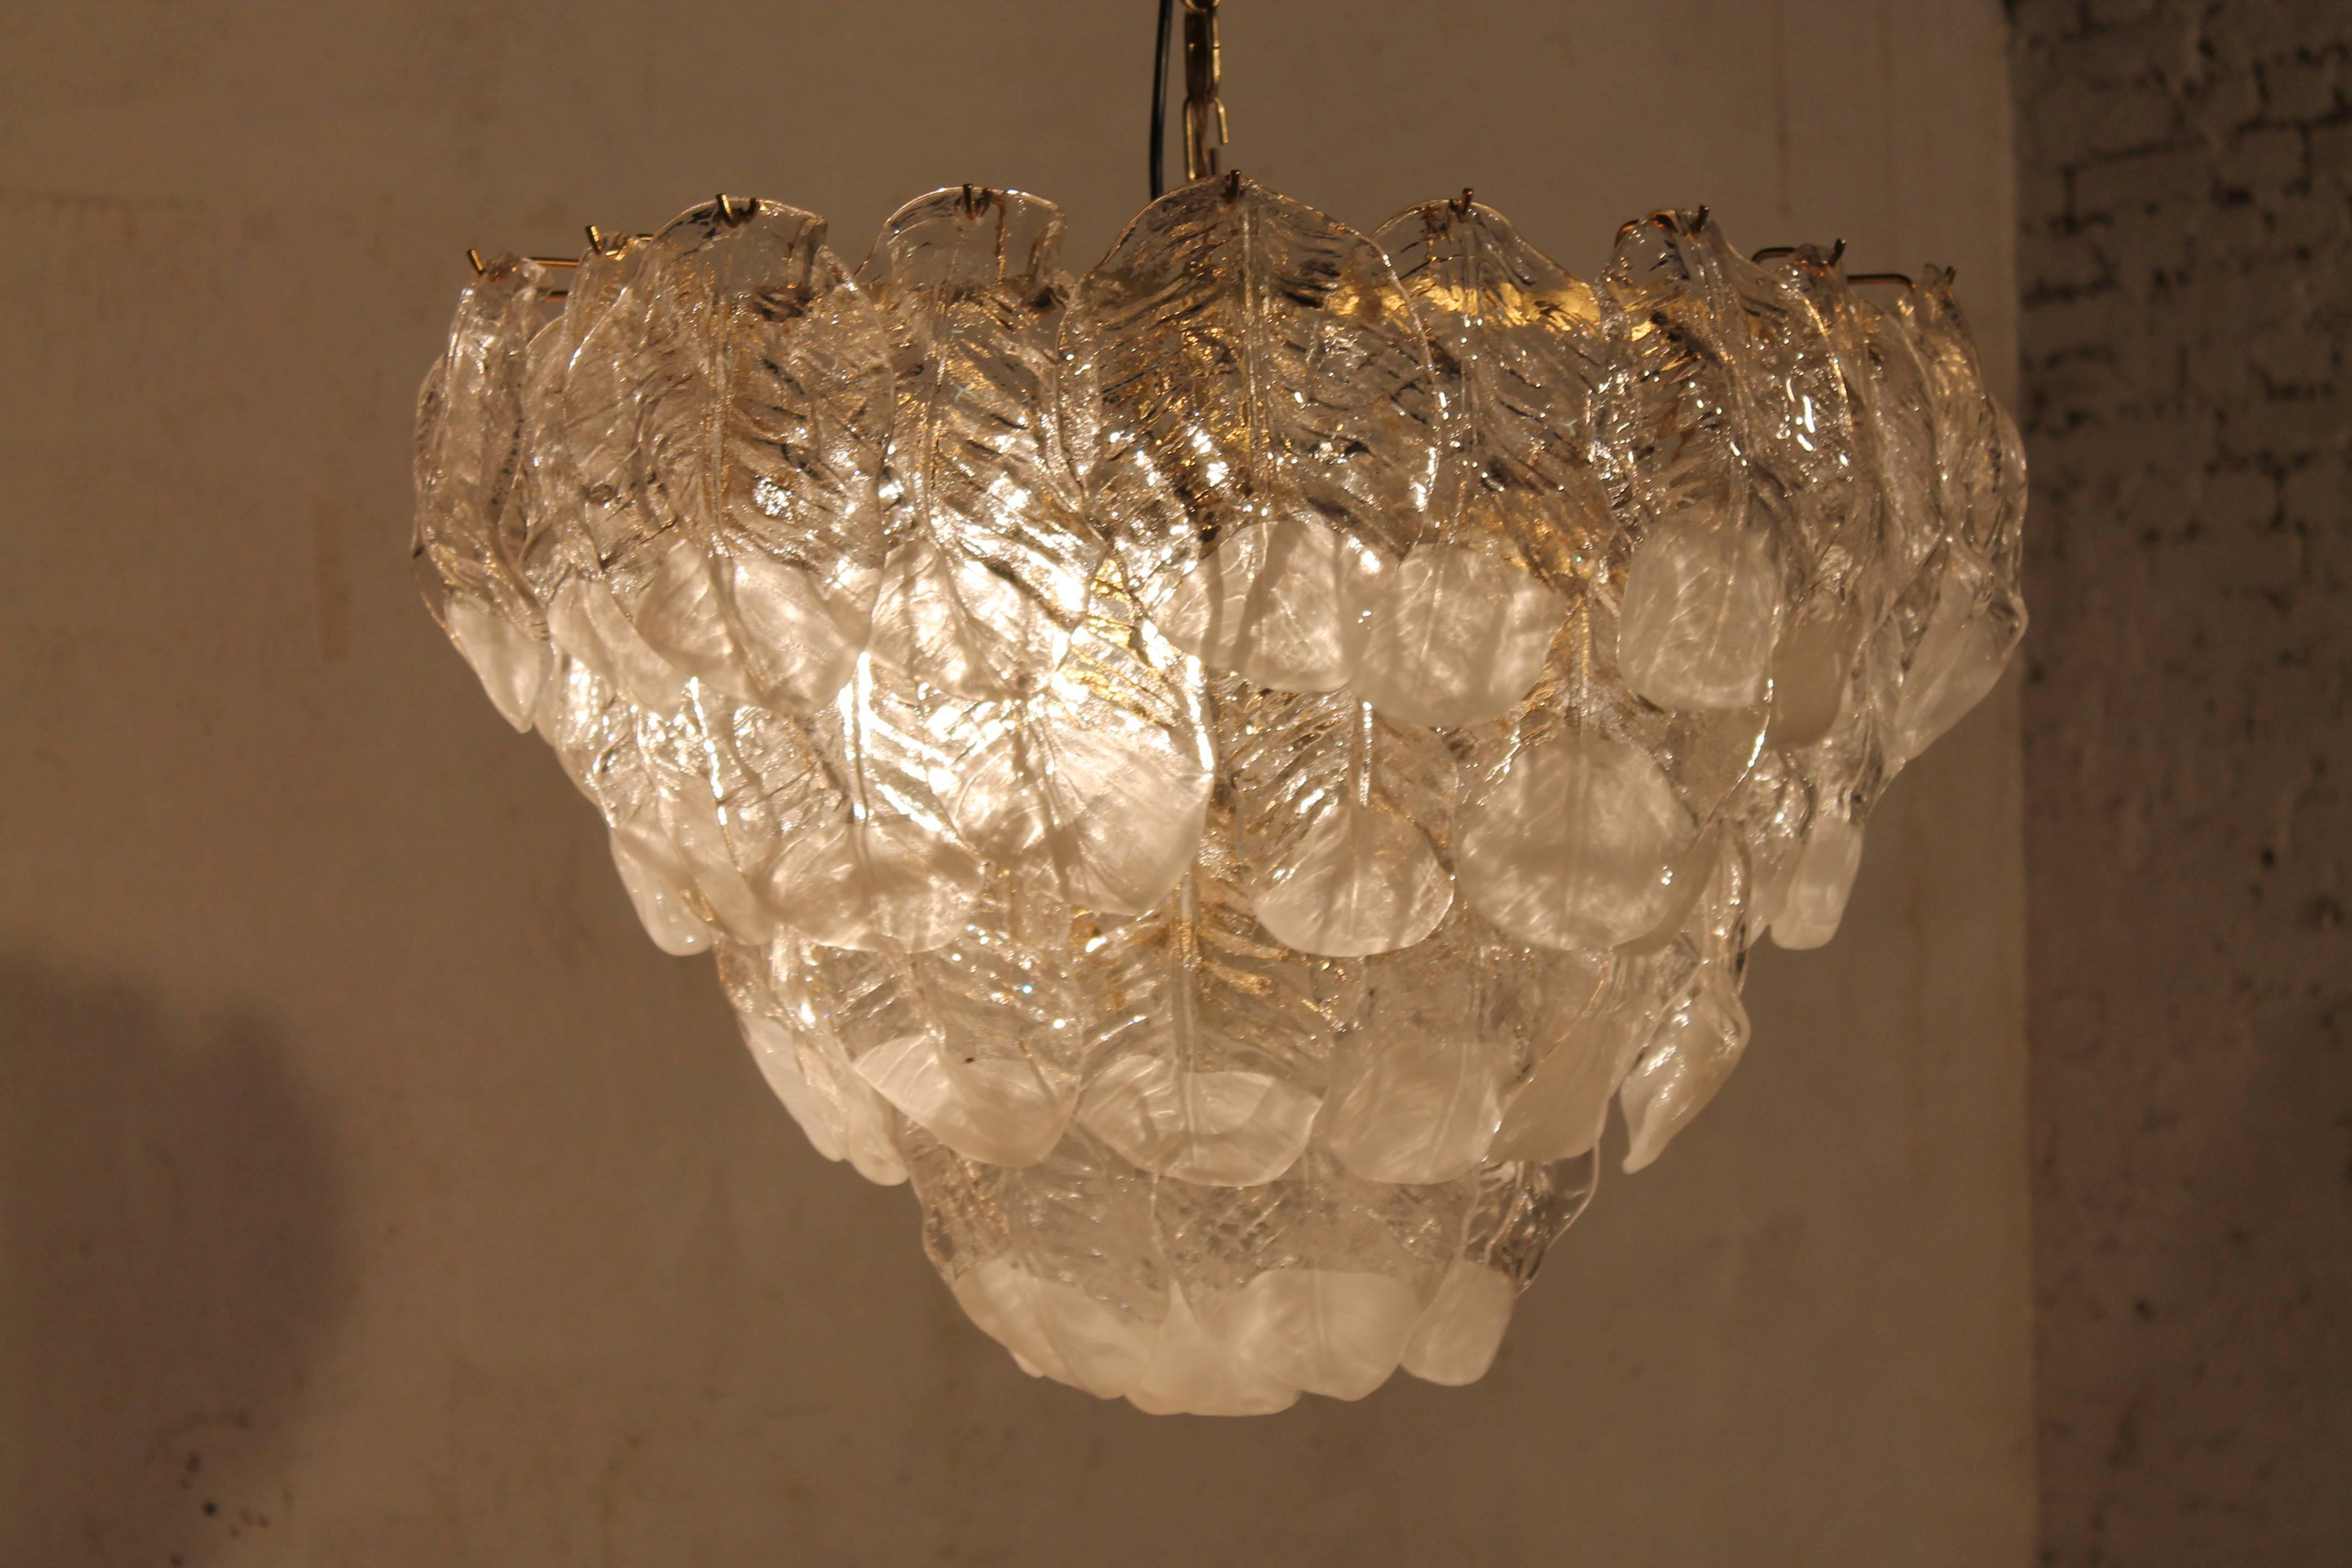 Large vintage Mazzega glass leaf chandelier, Italy, 1960s.

Very nice and big chandelier, with clear and white glass leafs

complete and good working condition also wired for US use

five big light bulbs each 75 watts

original vintage piece.